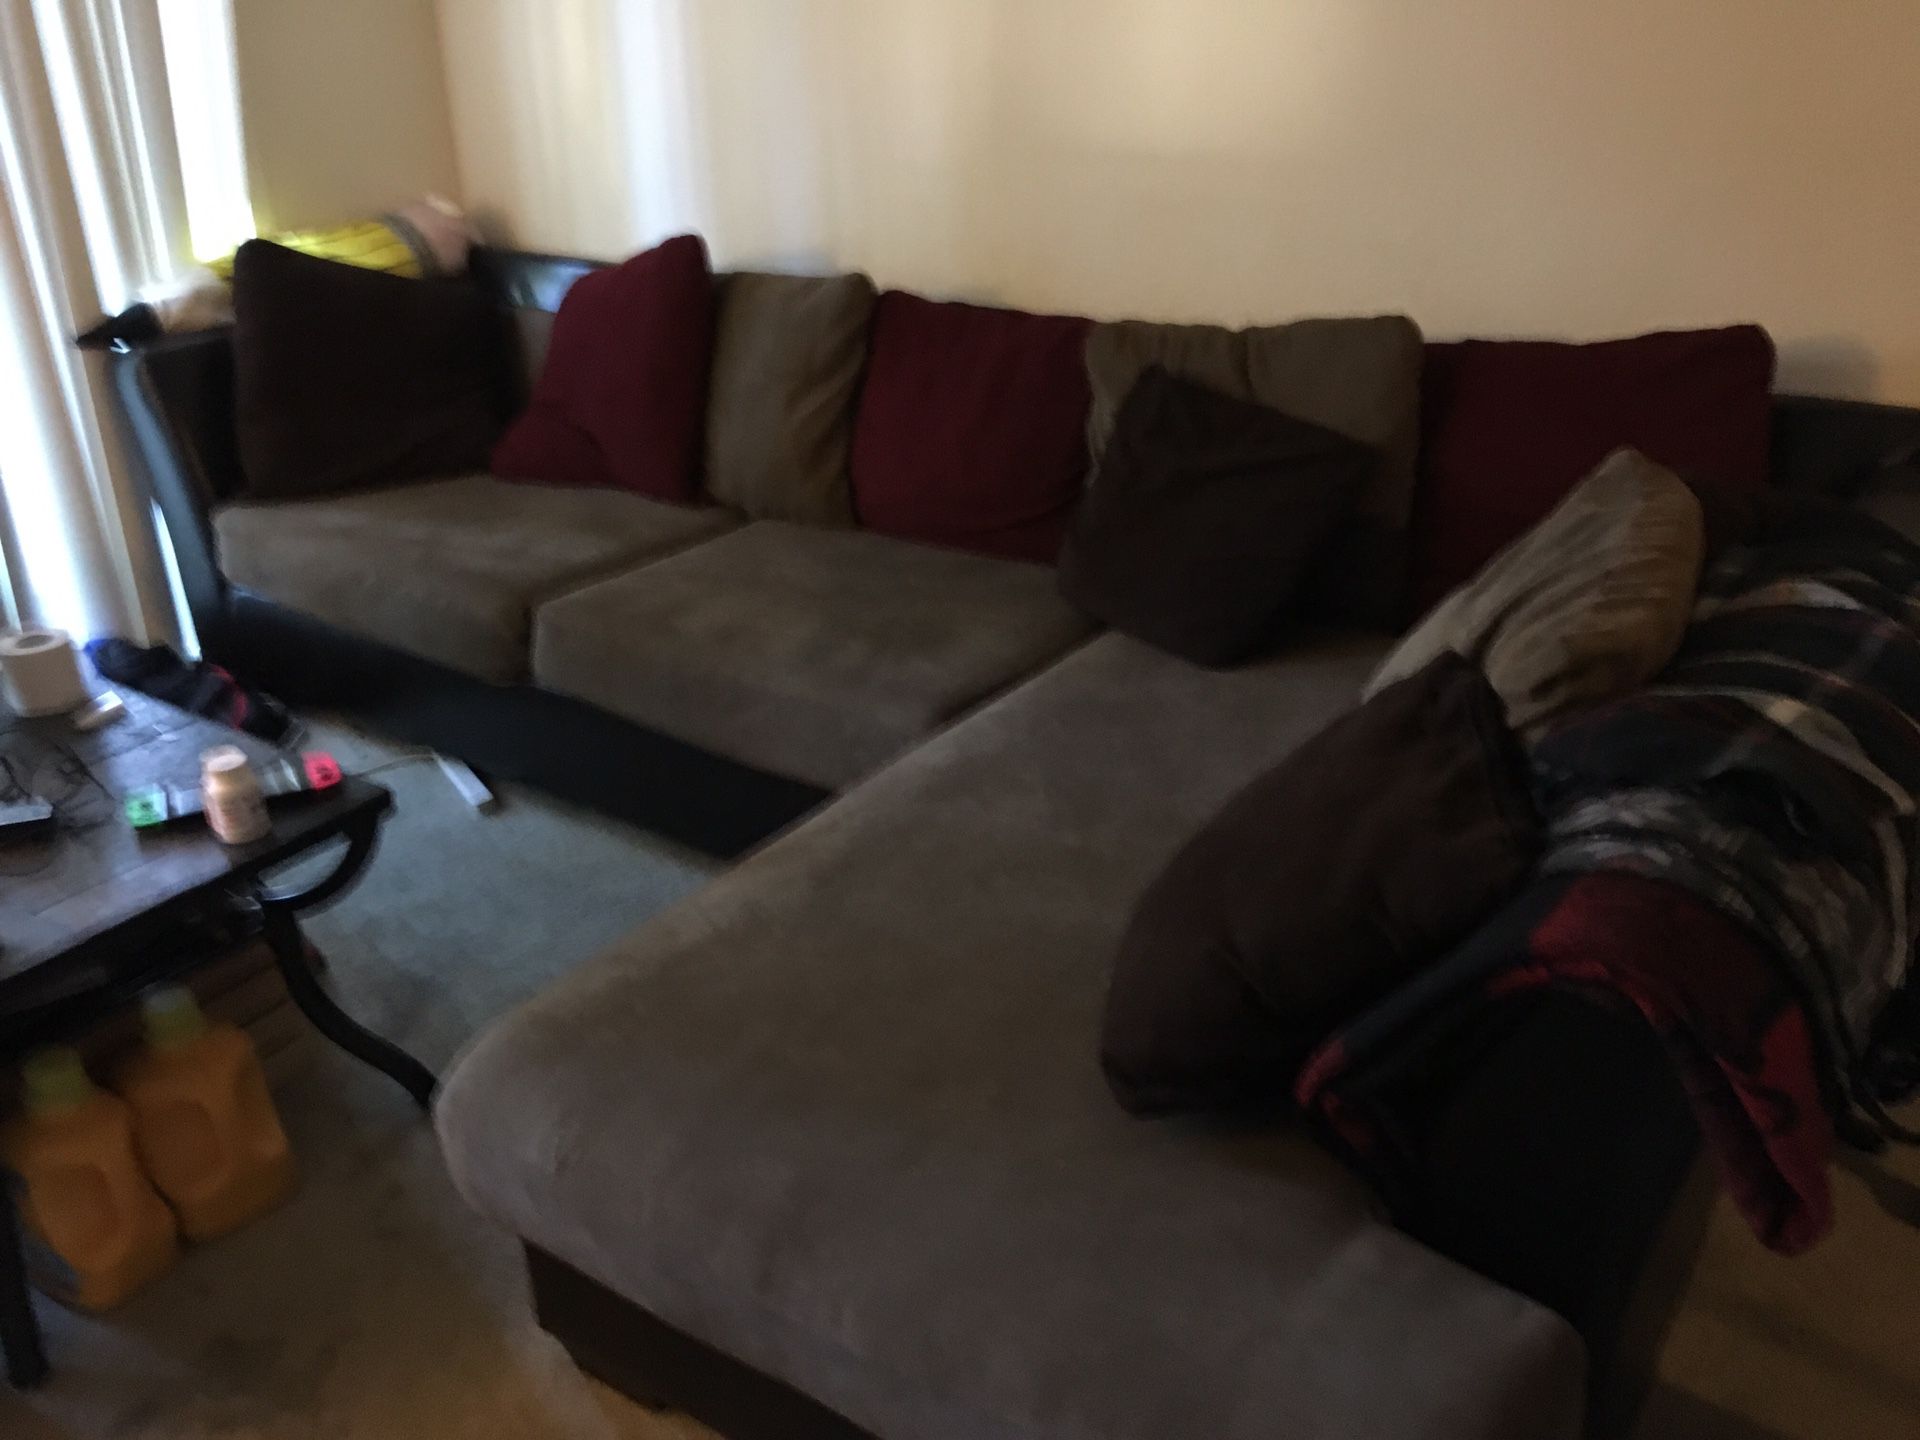 12 ft by 6ft sectional used couch.